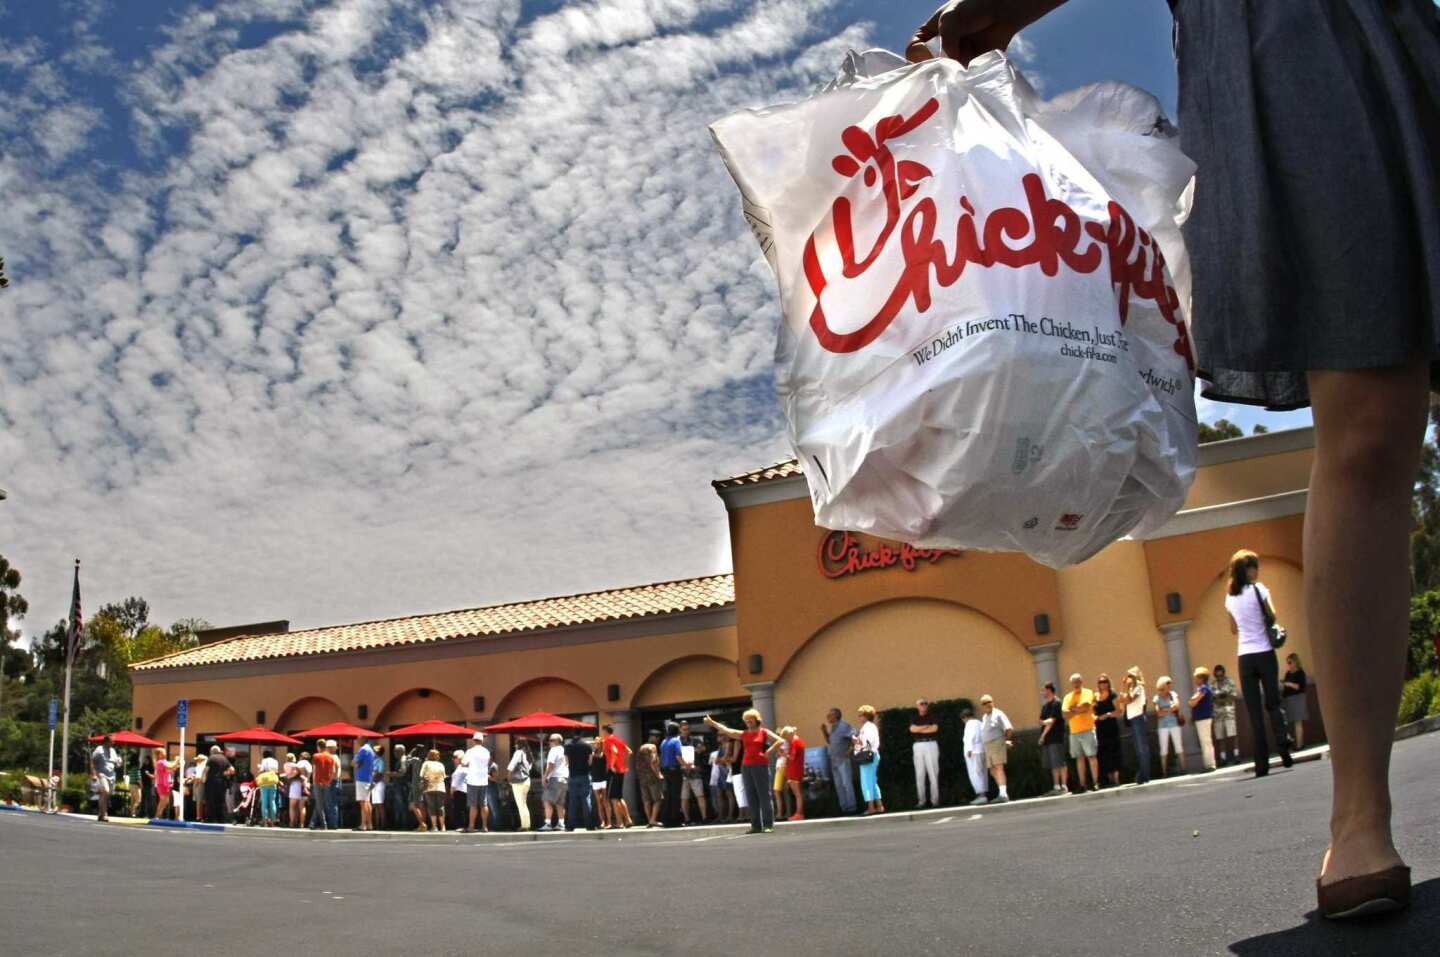 Hundreds of customers line up to get in the Chick-fil-A restaurant in Laguna Niguel.